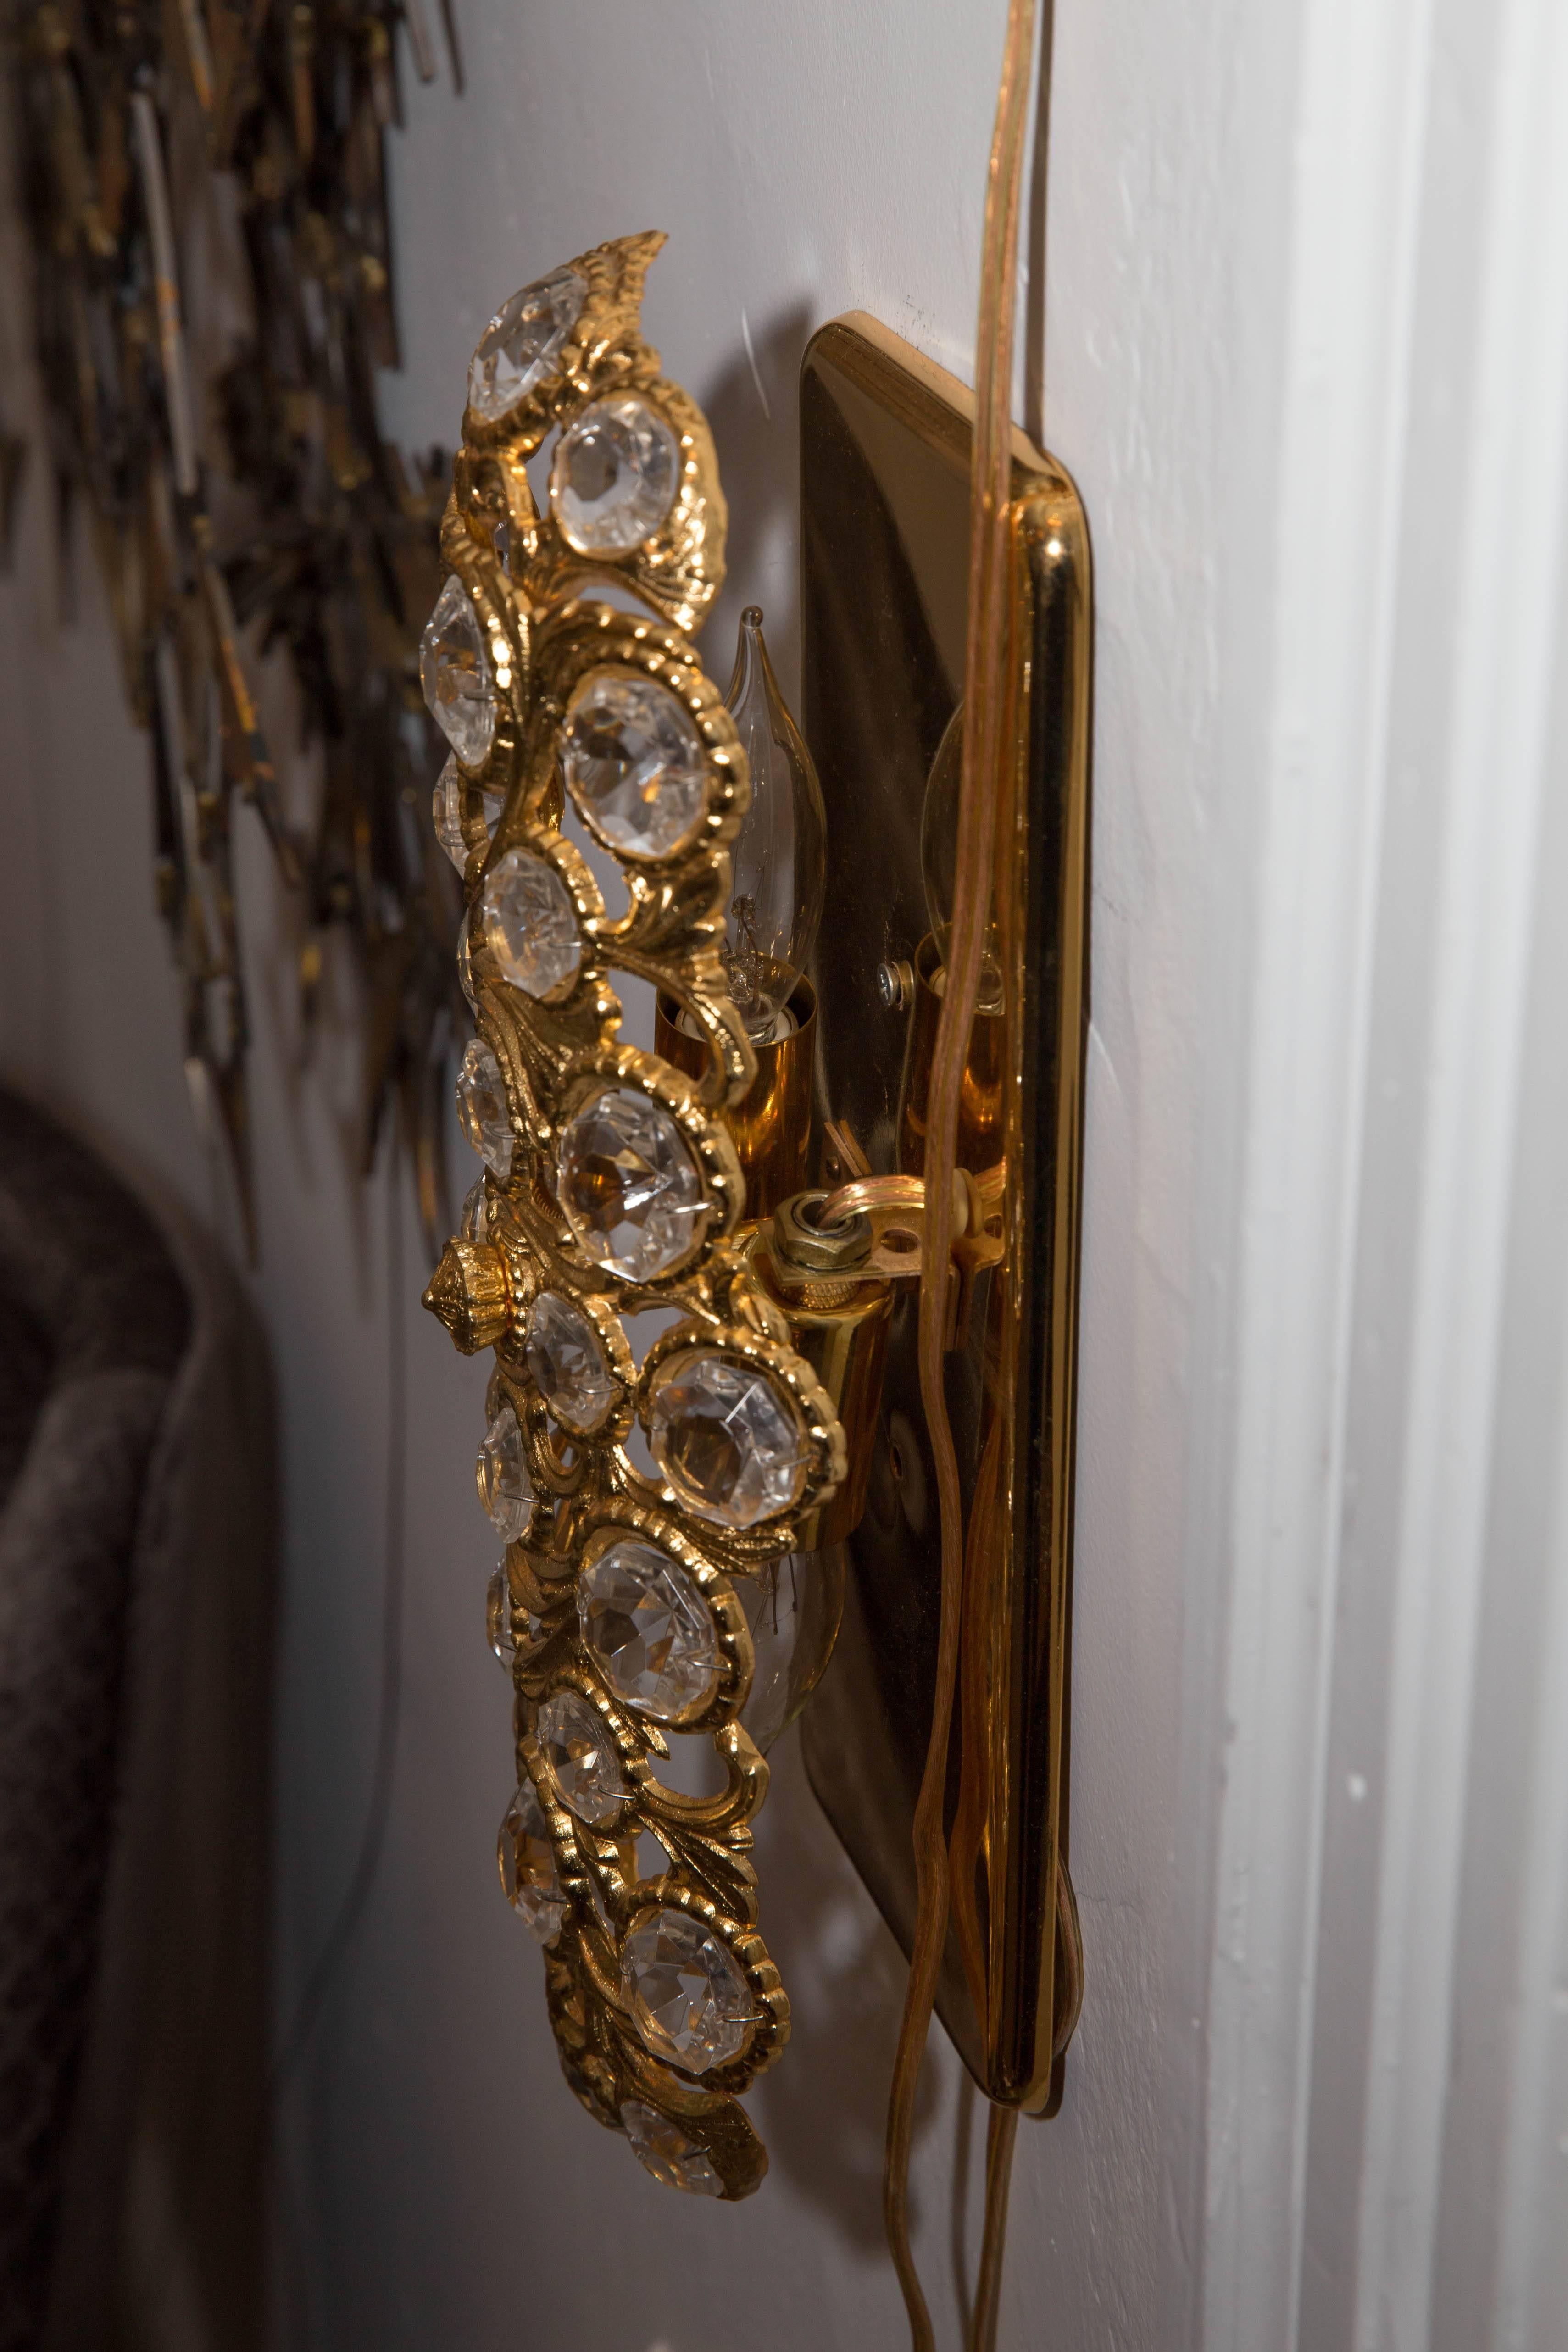 20th Century Pair of Gilt Metal Tendril Sconces with Inset Crystal Details